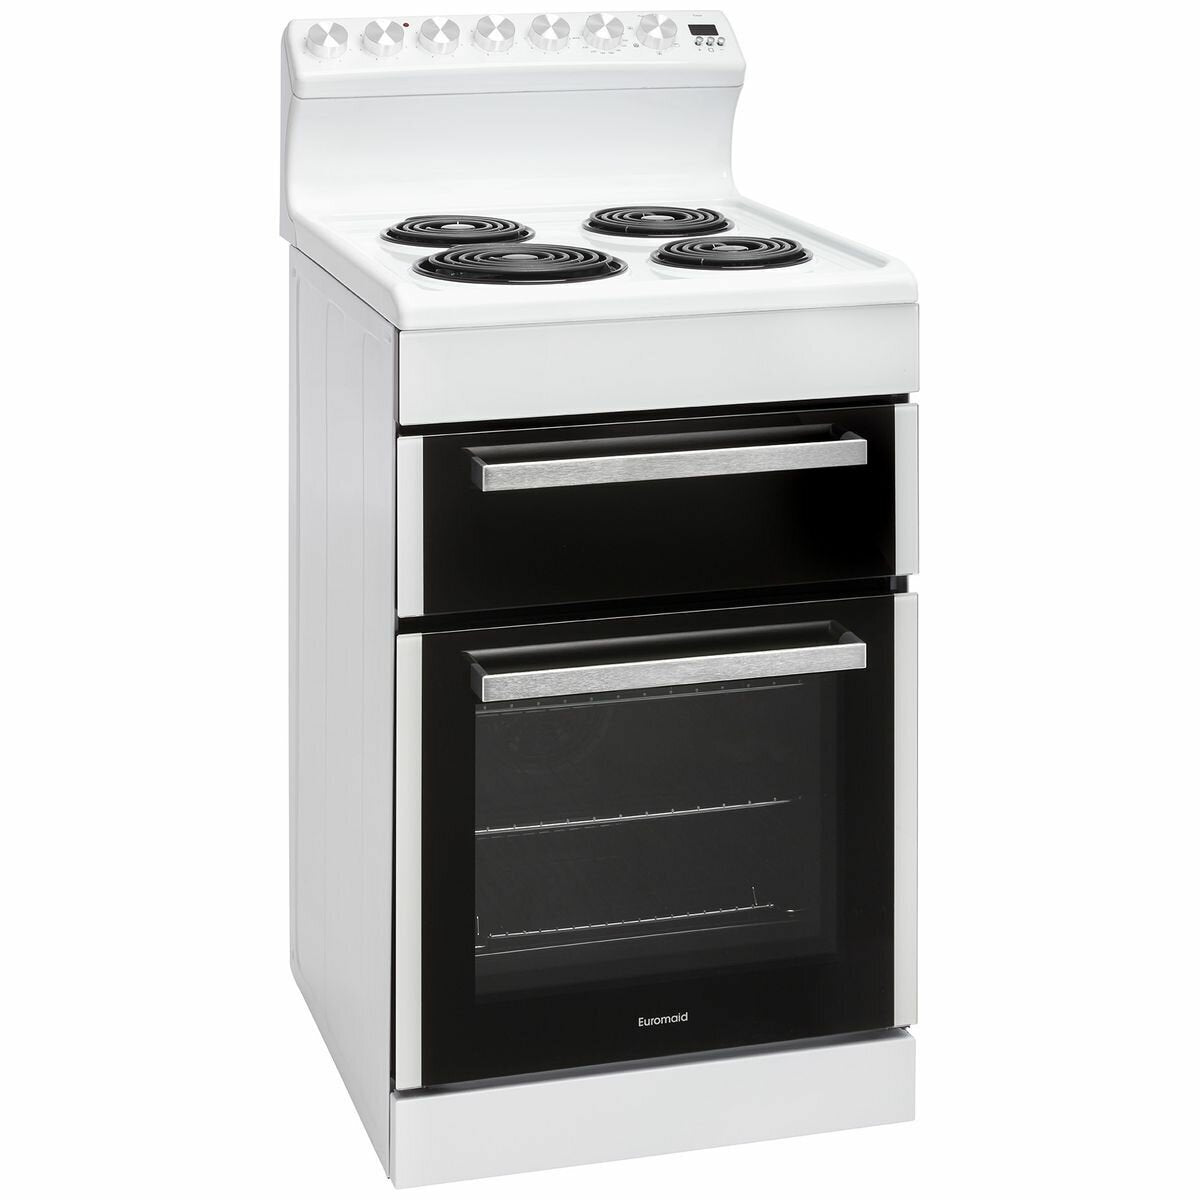 Euromaid 54cm Electric Upright Cooker White Model EFS54RC-DRW